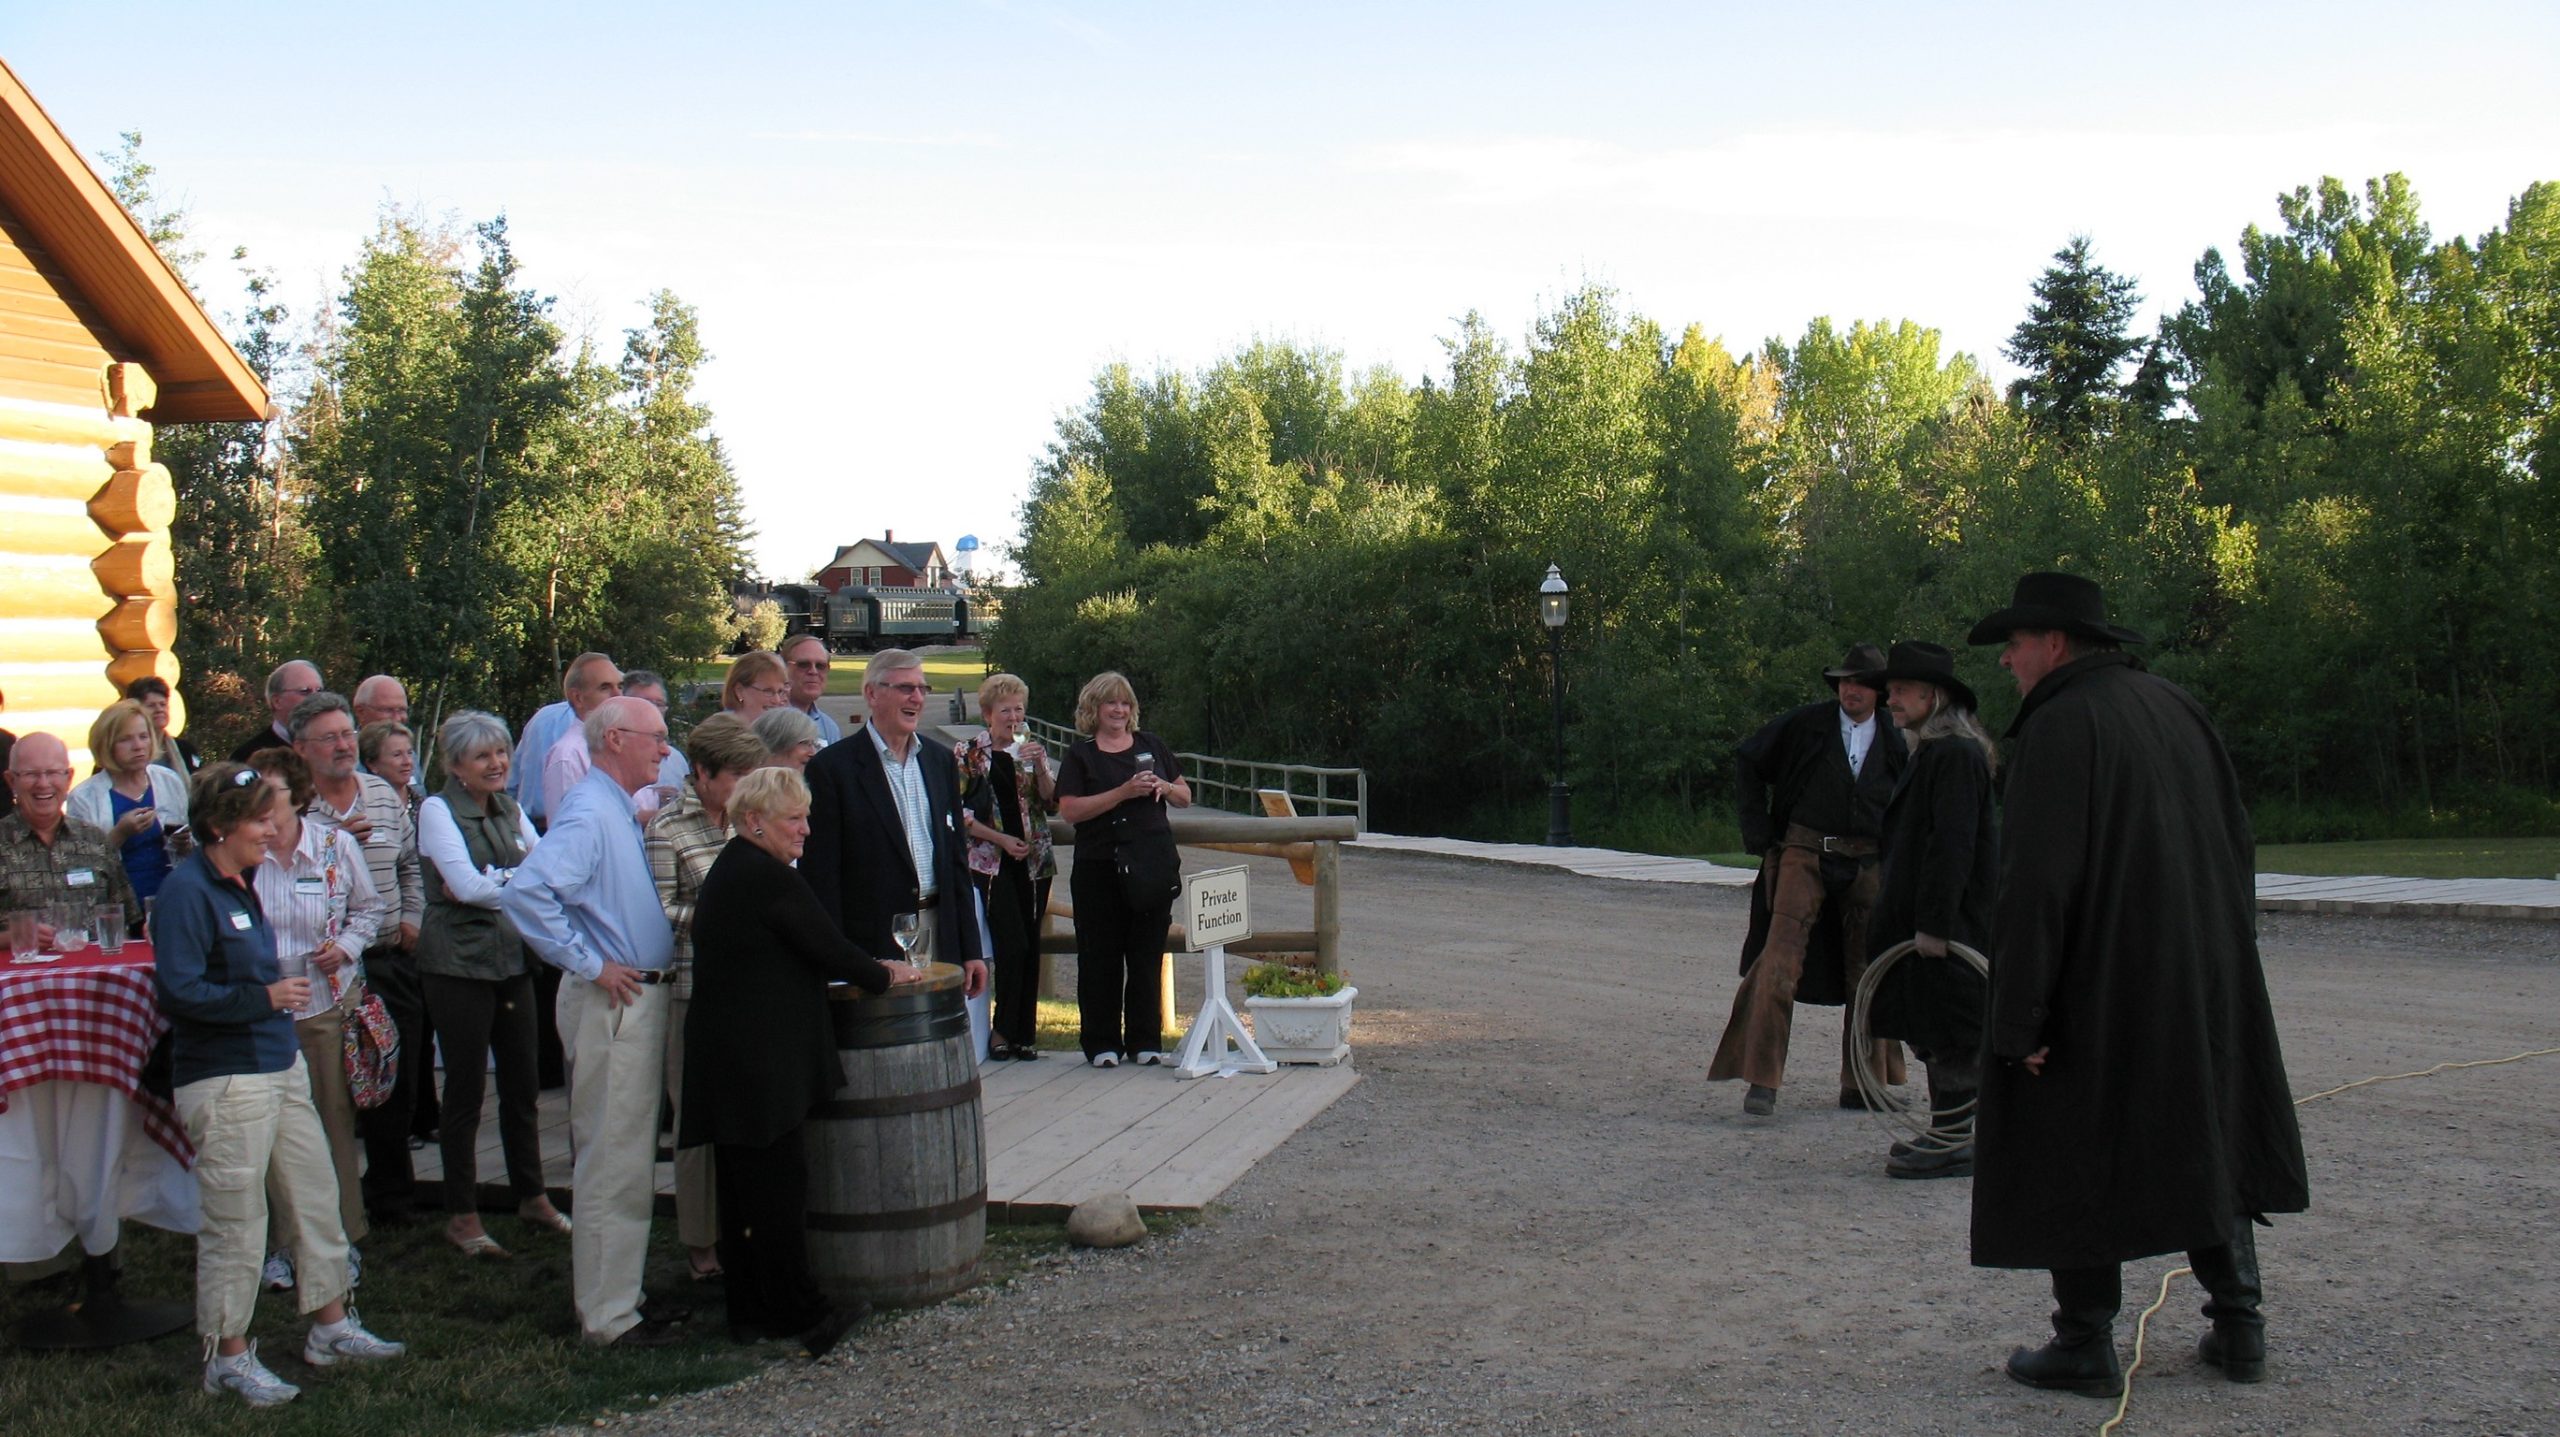 Party Entertainment featuring Gunfighters talk with private event goers at Heritage Park